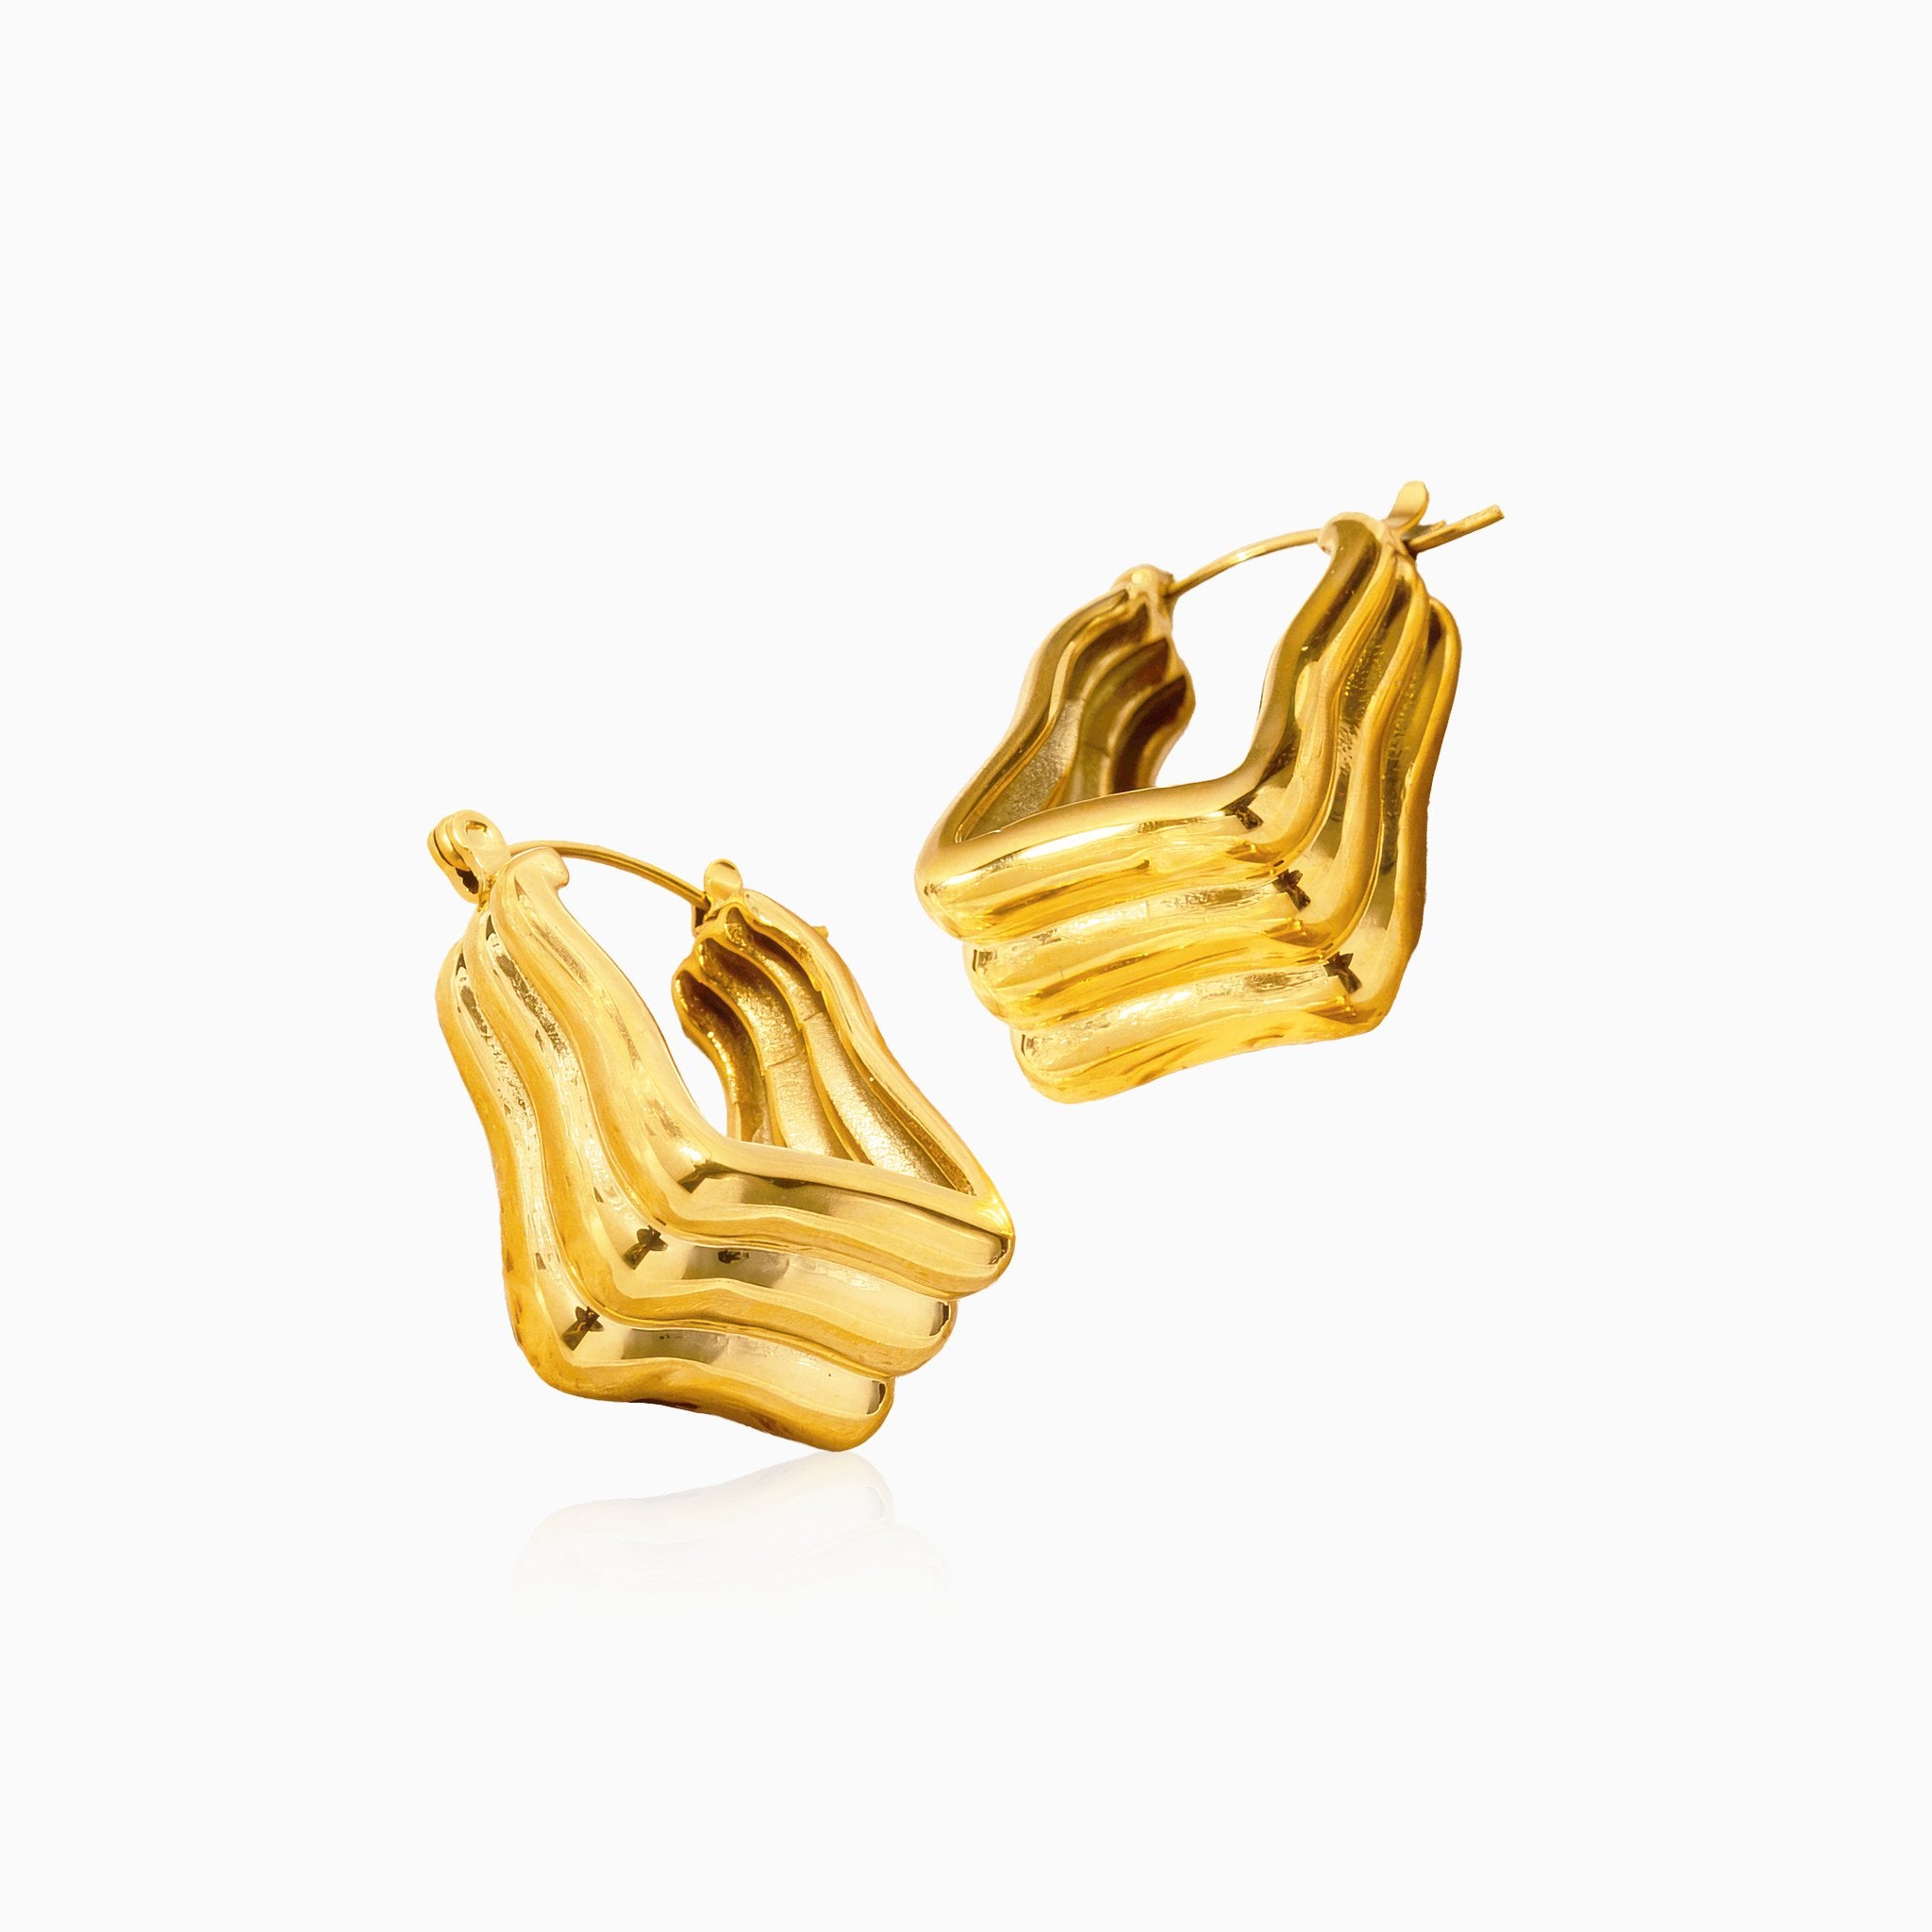 Triangle Stripe Design Earrings - Nobbier - Earrings - 18K Gold And Titanium PVD Coated Jewelry